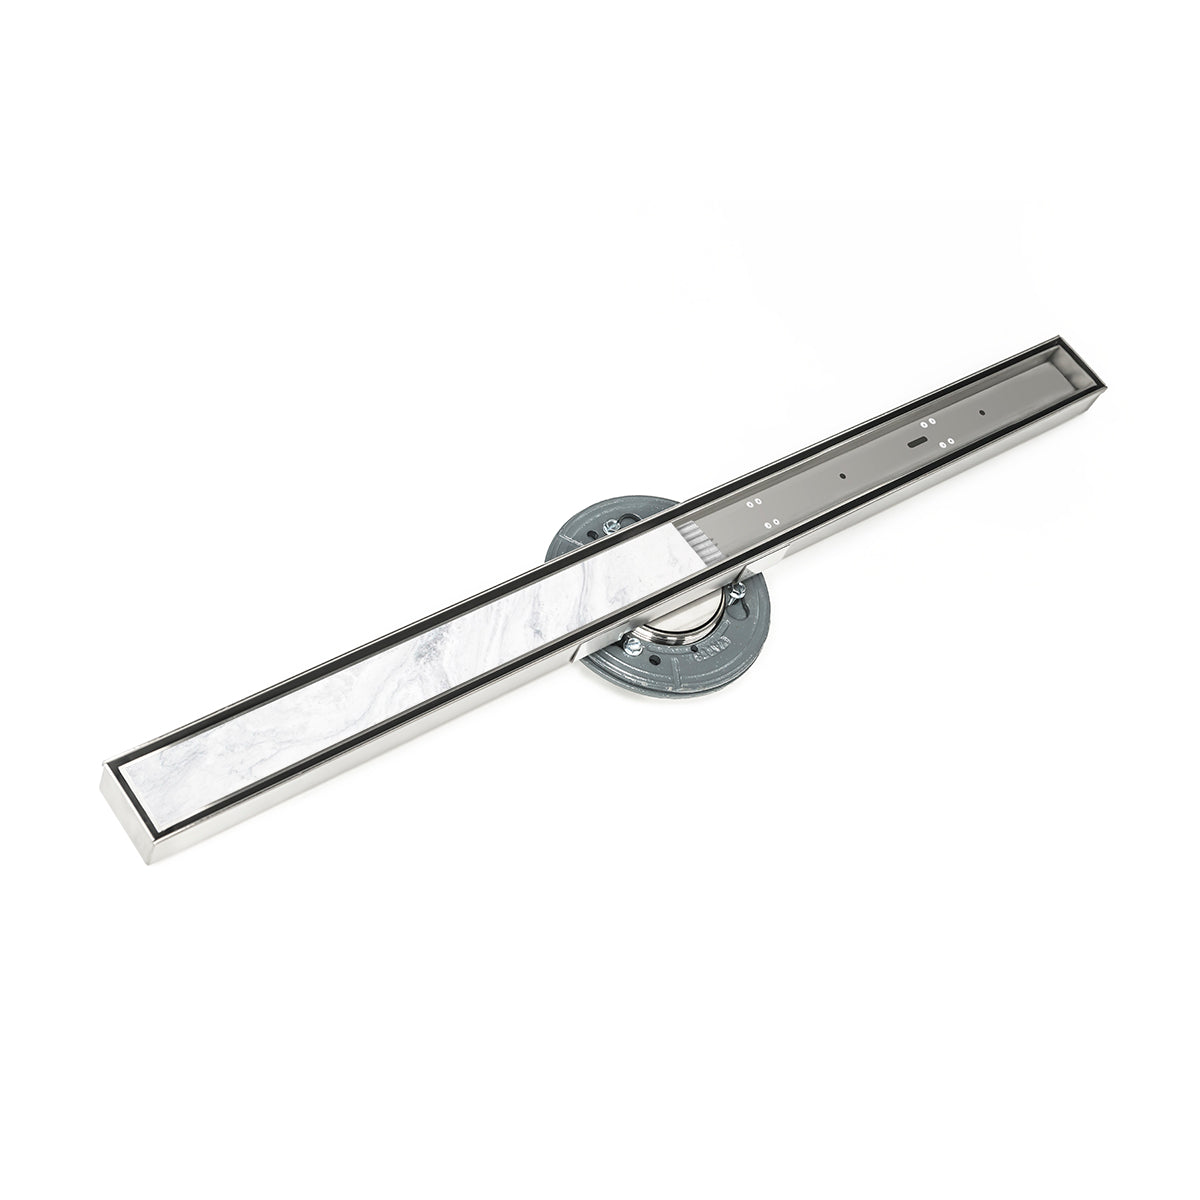 Infinity Drain 80" S-Stainless Steel Series High Flow Site Sizable Linear Drain Kit with Tile Insert Frame with PVC Drain Body, 3" Outlet